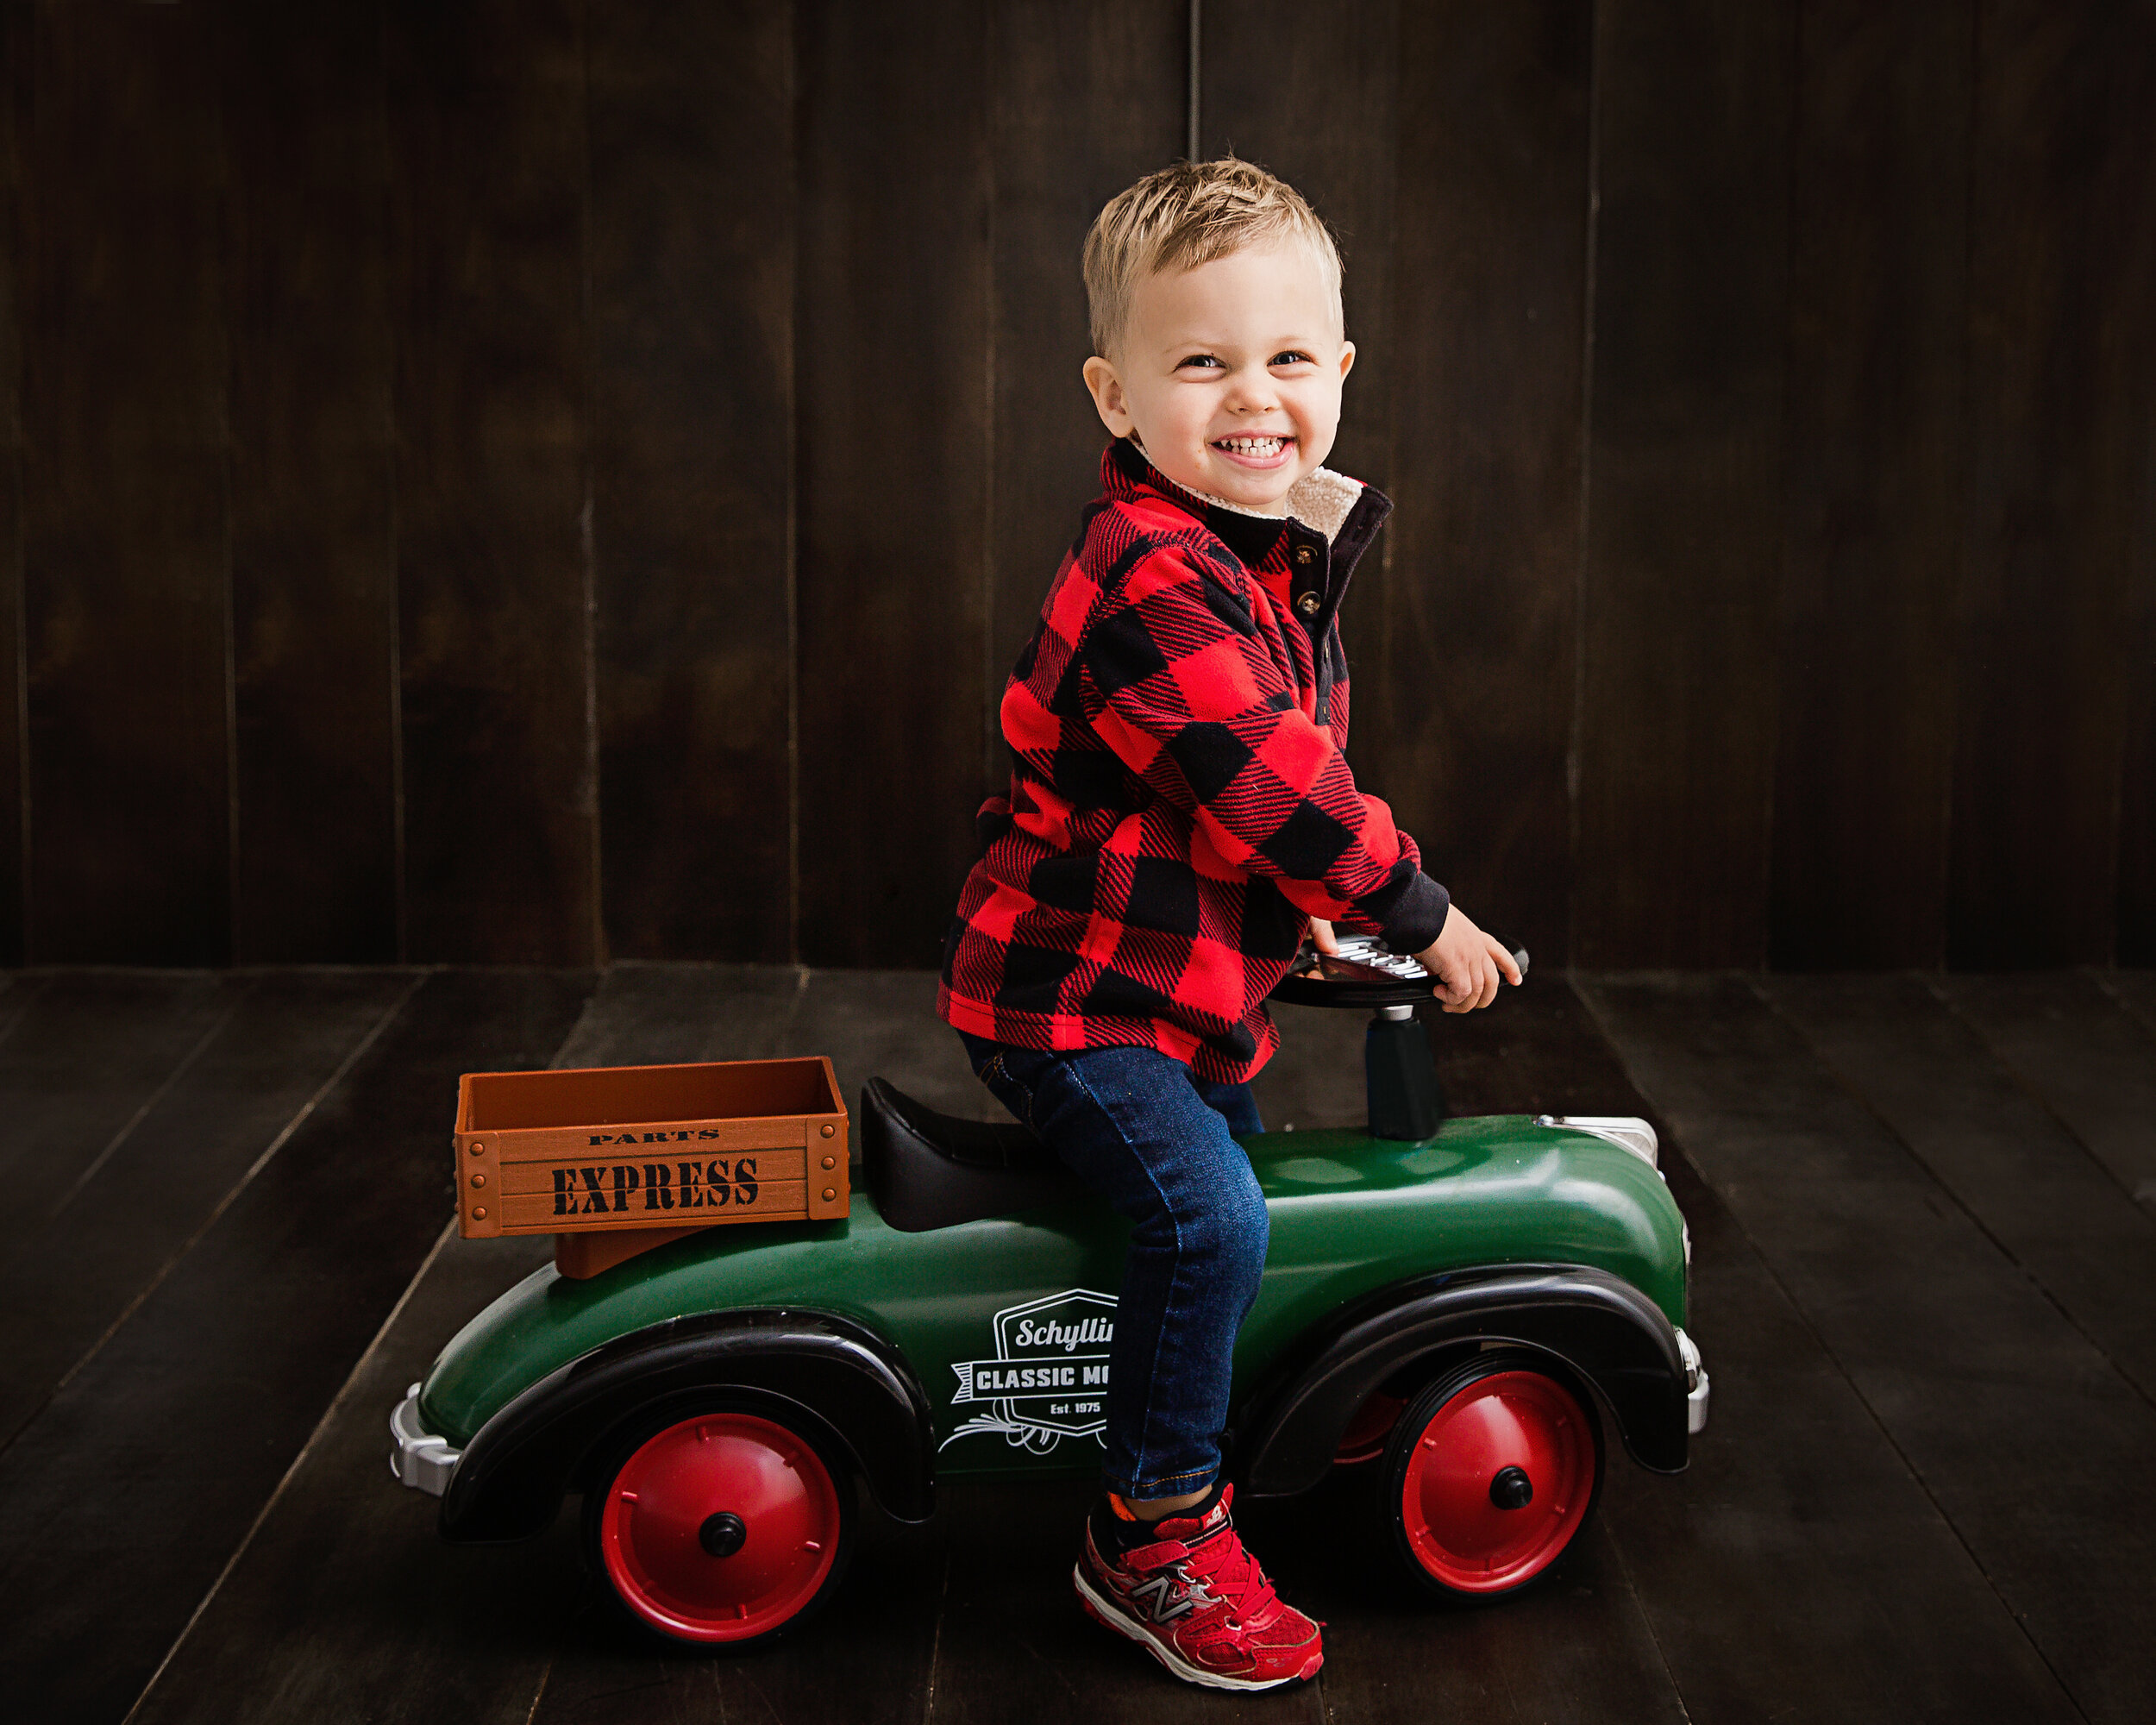 little-boy-smiling-while-riding-little-green-car